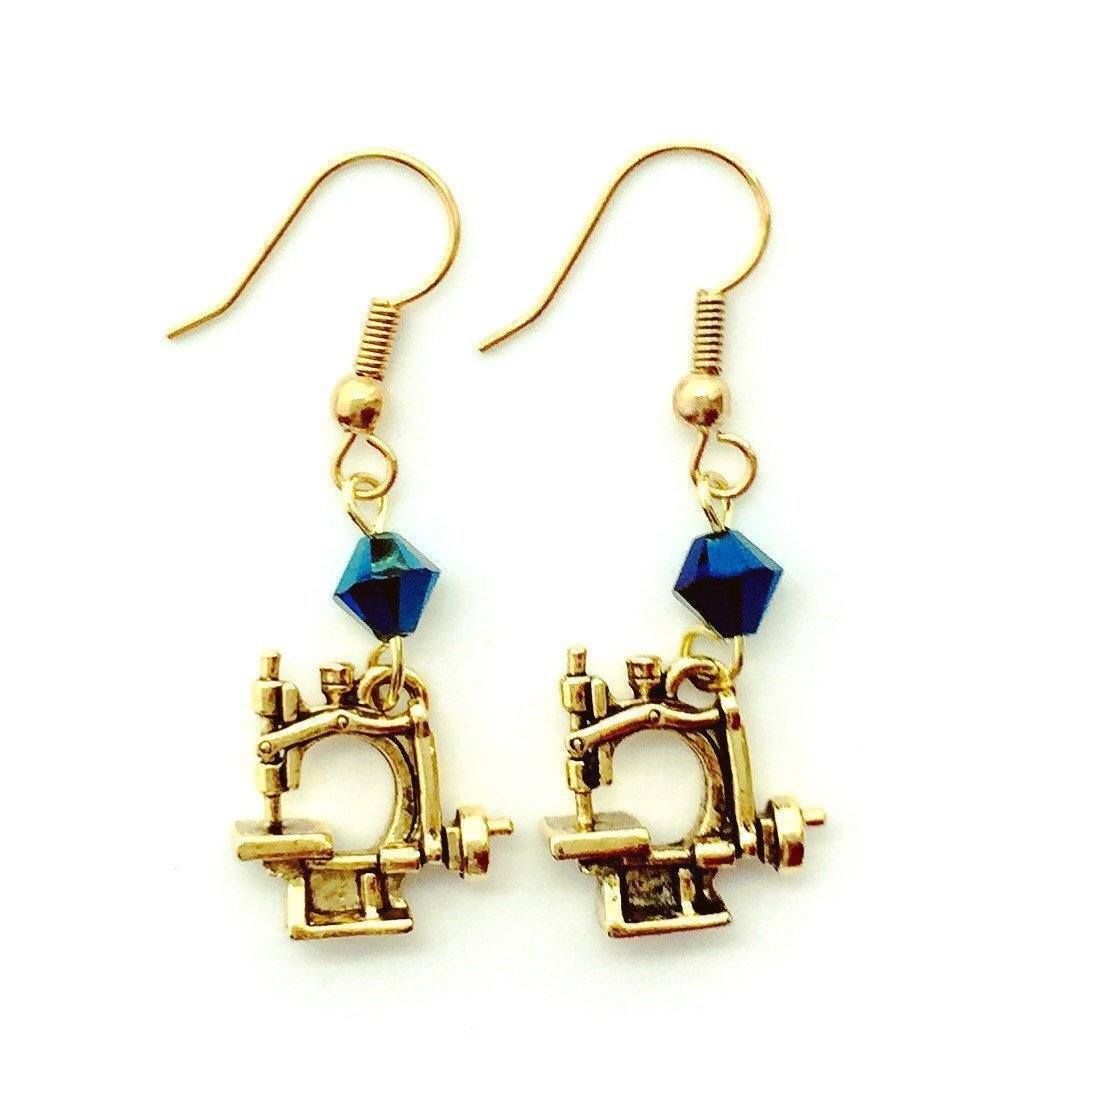 Hand Crank Sewing Machine Gold Earrings with Blue Swarovski Crystals-Watchus